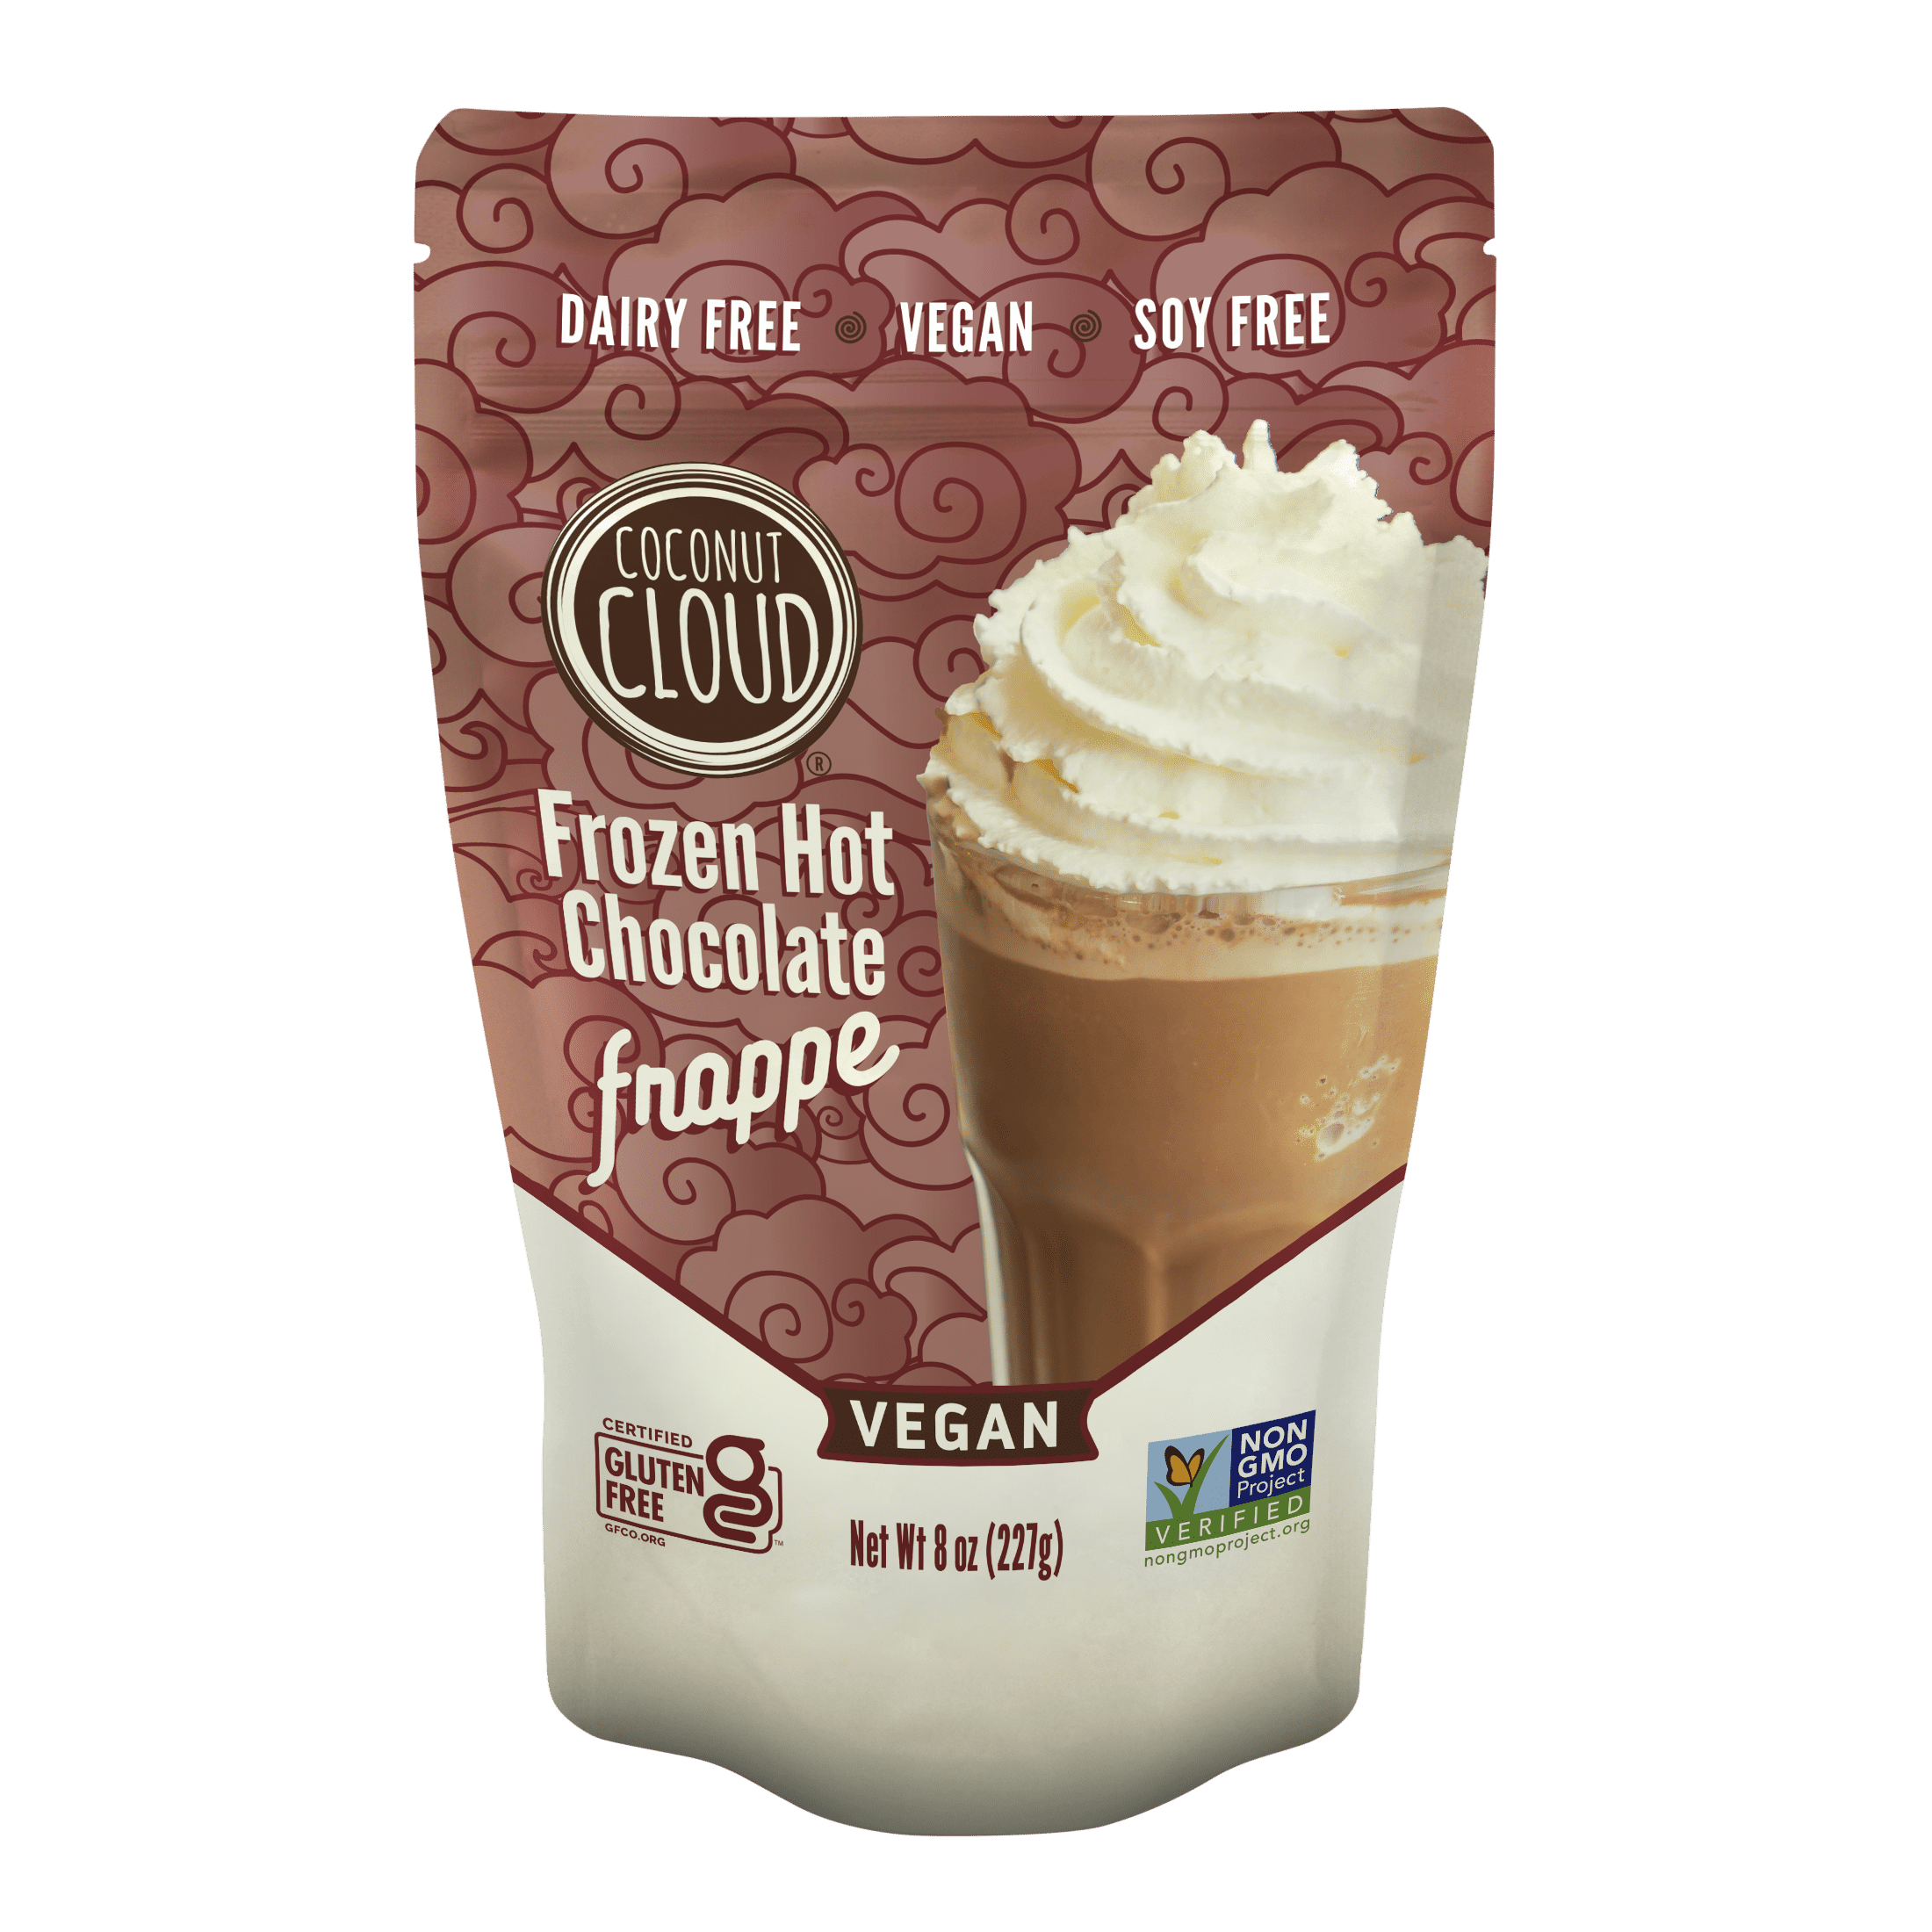 https://gtfoitsvegan.com/wp-content/uploads/2023/04/FRONT-Froz-Hot-Chocolate-Frappe-pouch-UPDATED.png